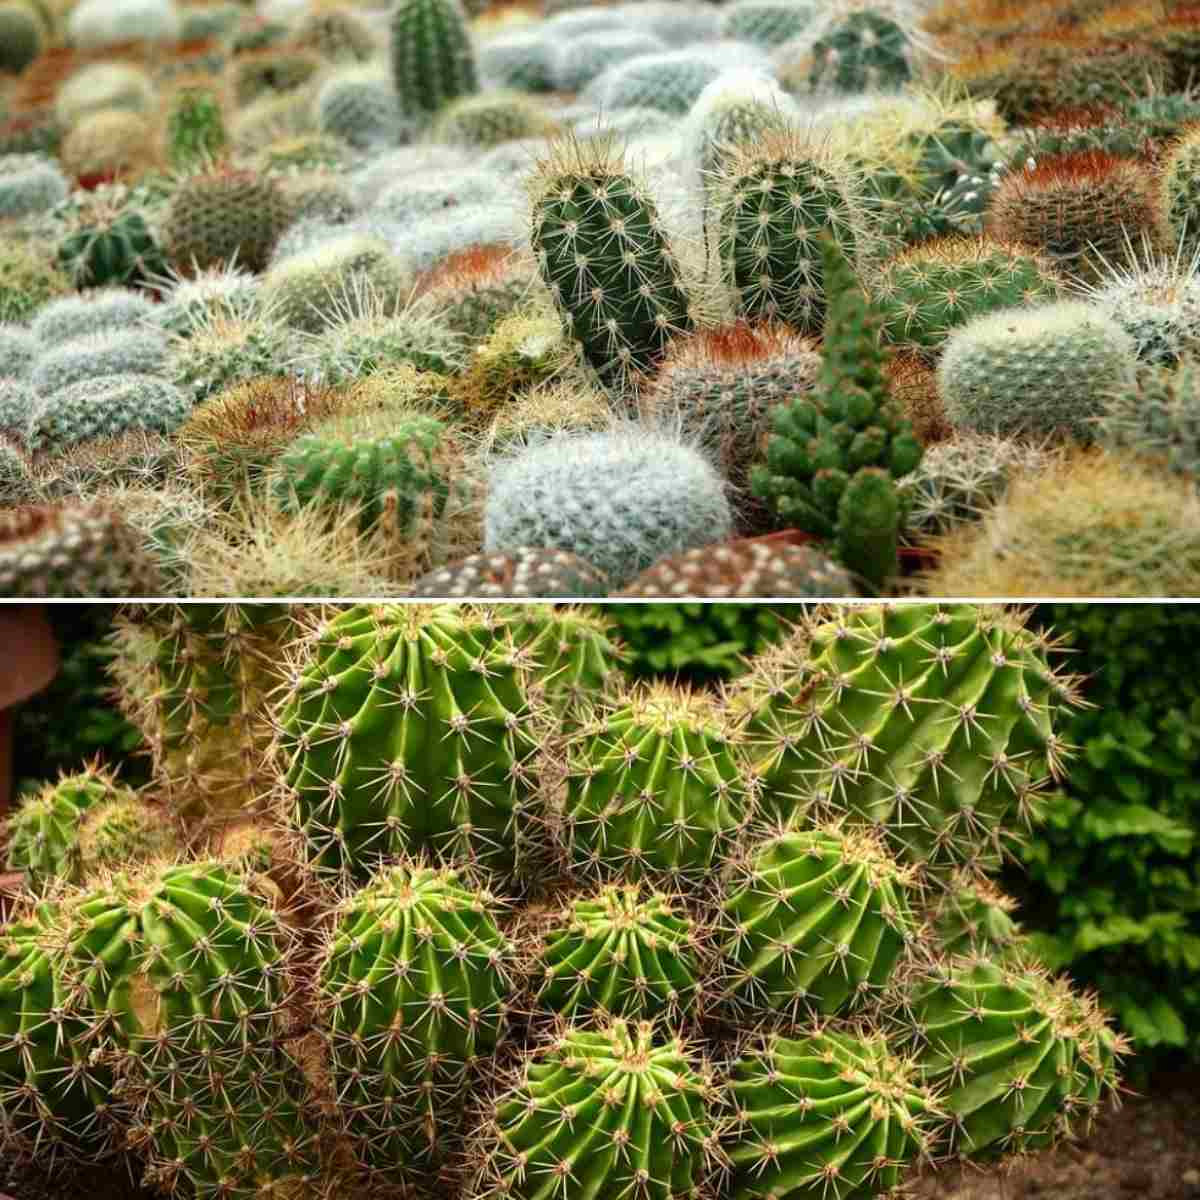 types-of-cactus-cactus-growing-tips-a-full-guide-gardening-tips